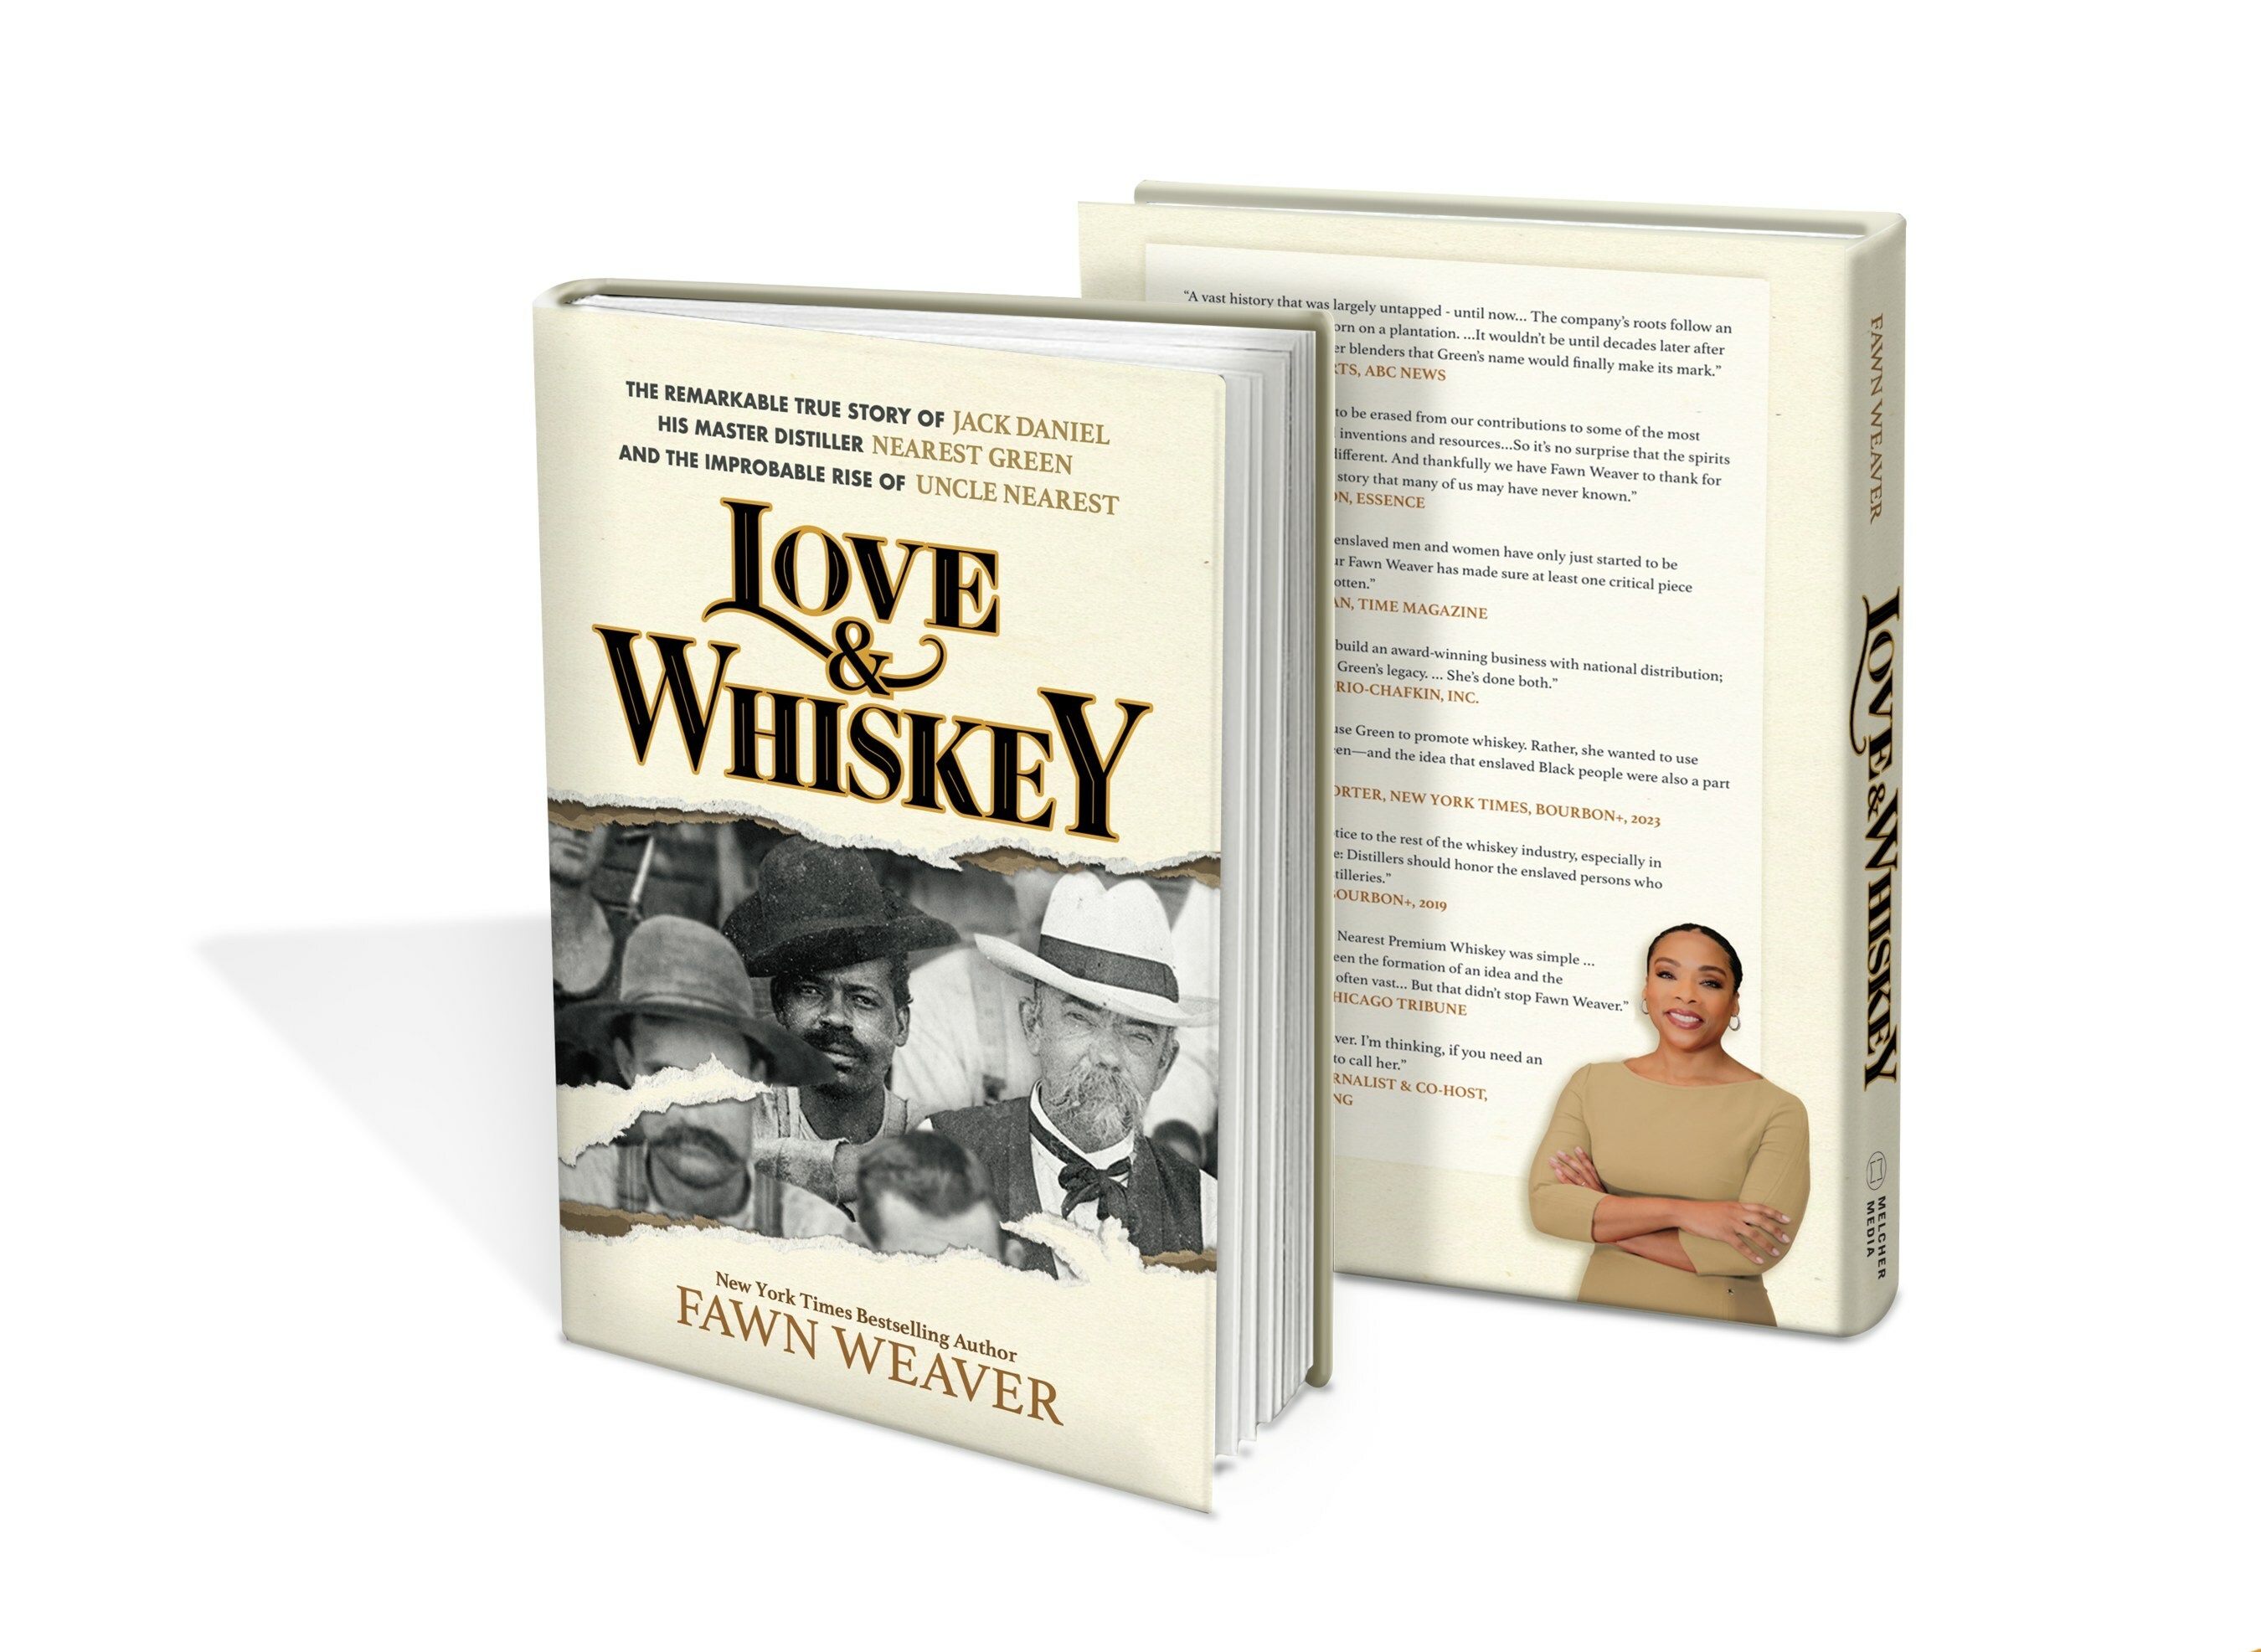 Forthcoming Book “Love & Whiskey” Will Tell the Story of Uncle Nearest & Jack Daniel